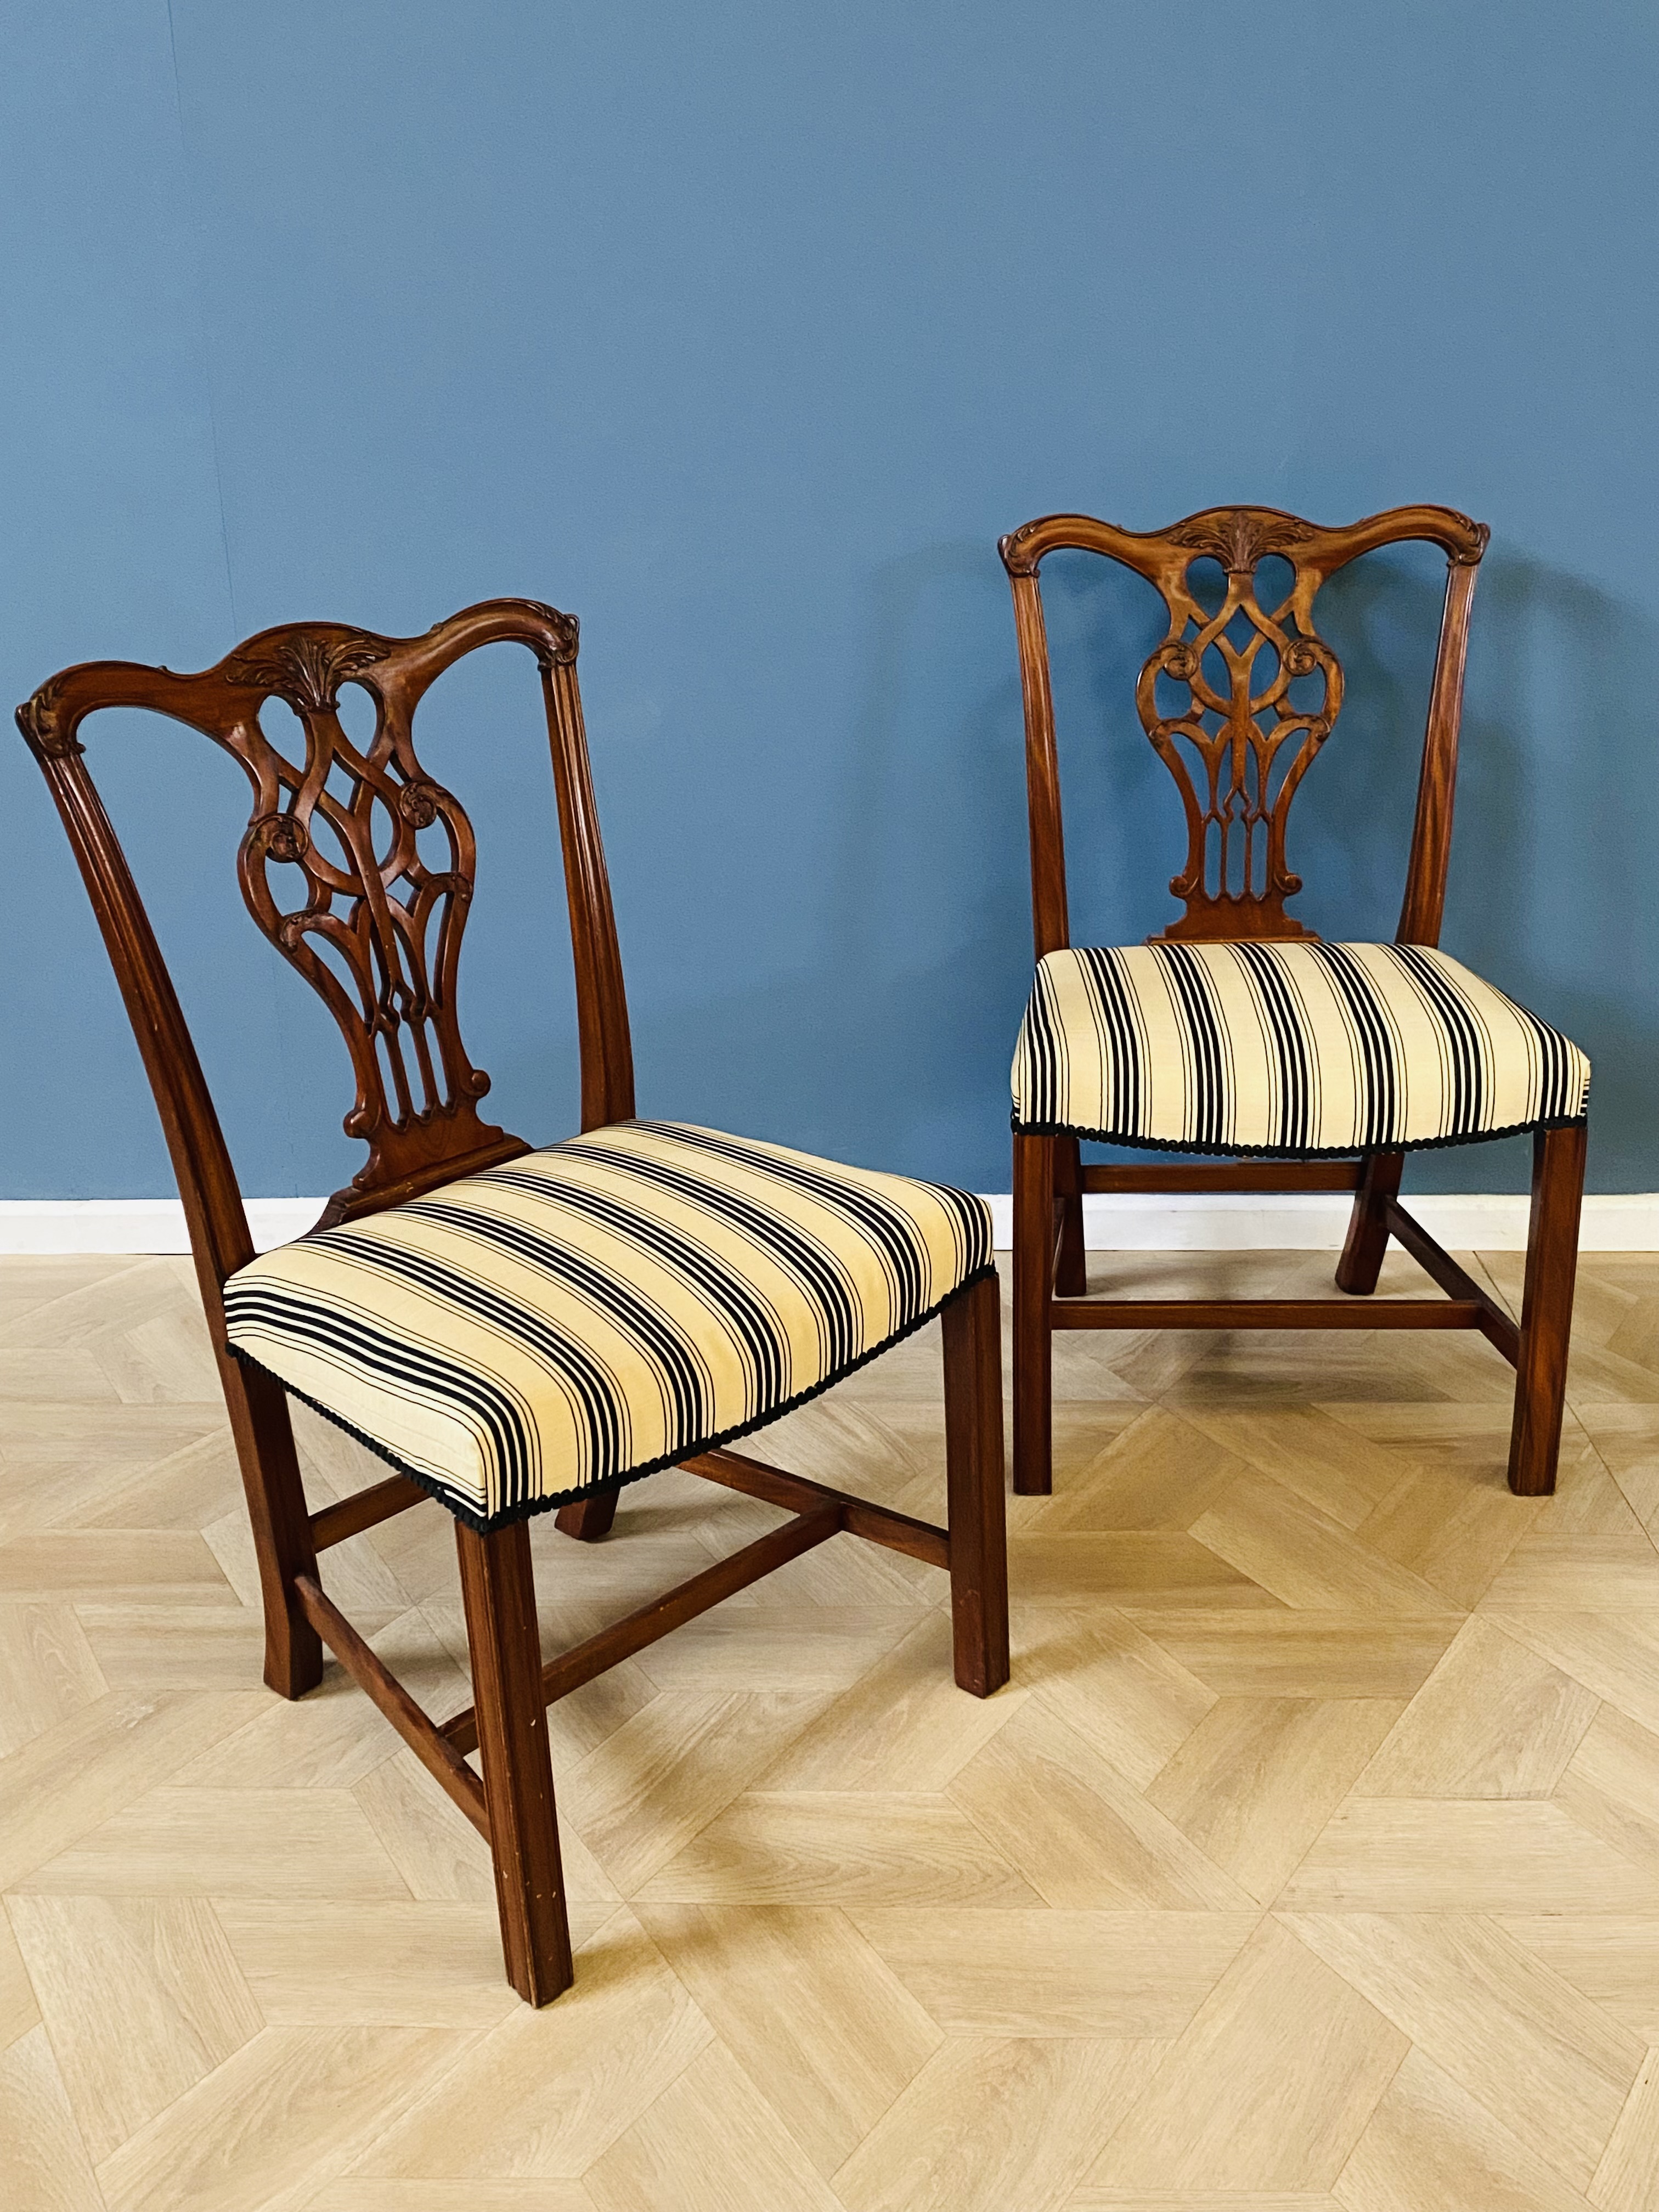 Pair of mahogany Chippendale style side chairs - Image 2 of 5